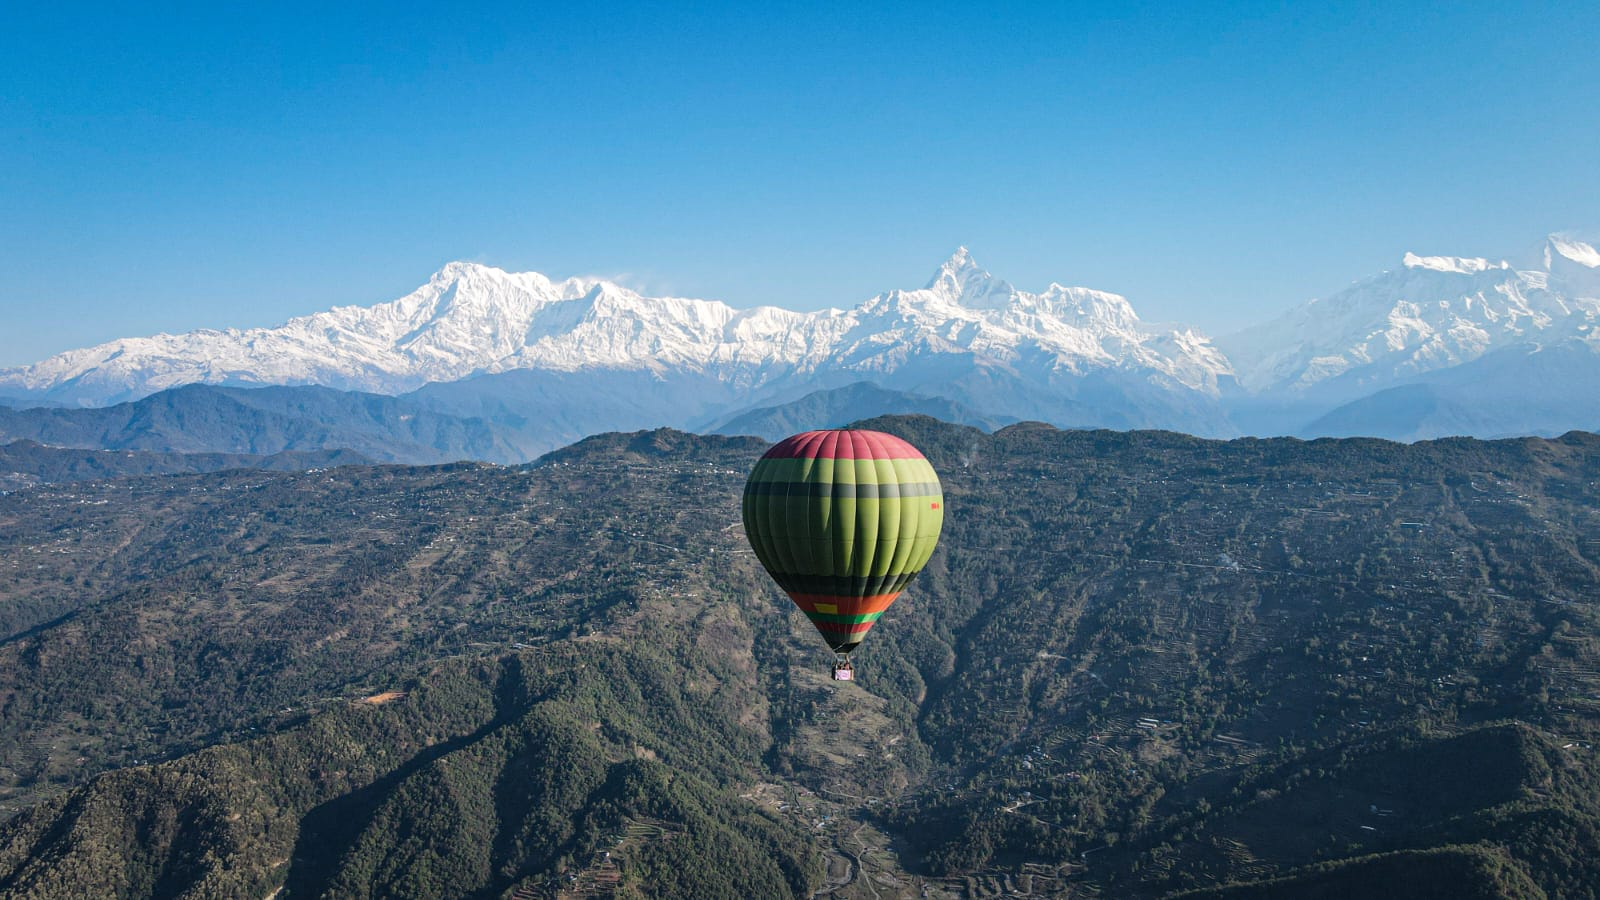 Hot air balloons in Nepal set soar to new heights: Triple altitude increase enhances mountain and scenic views